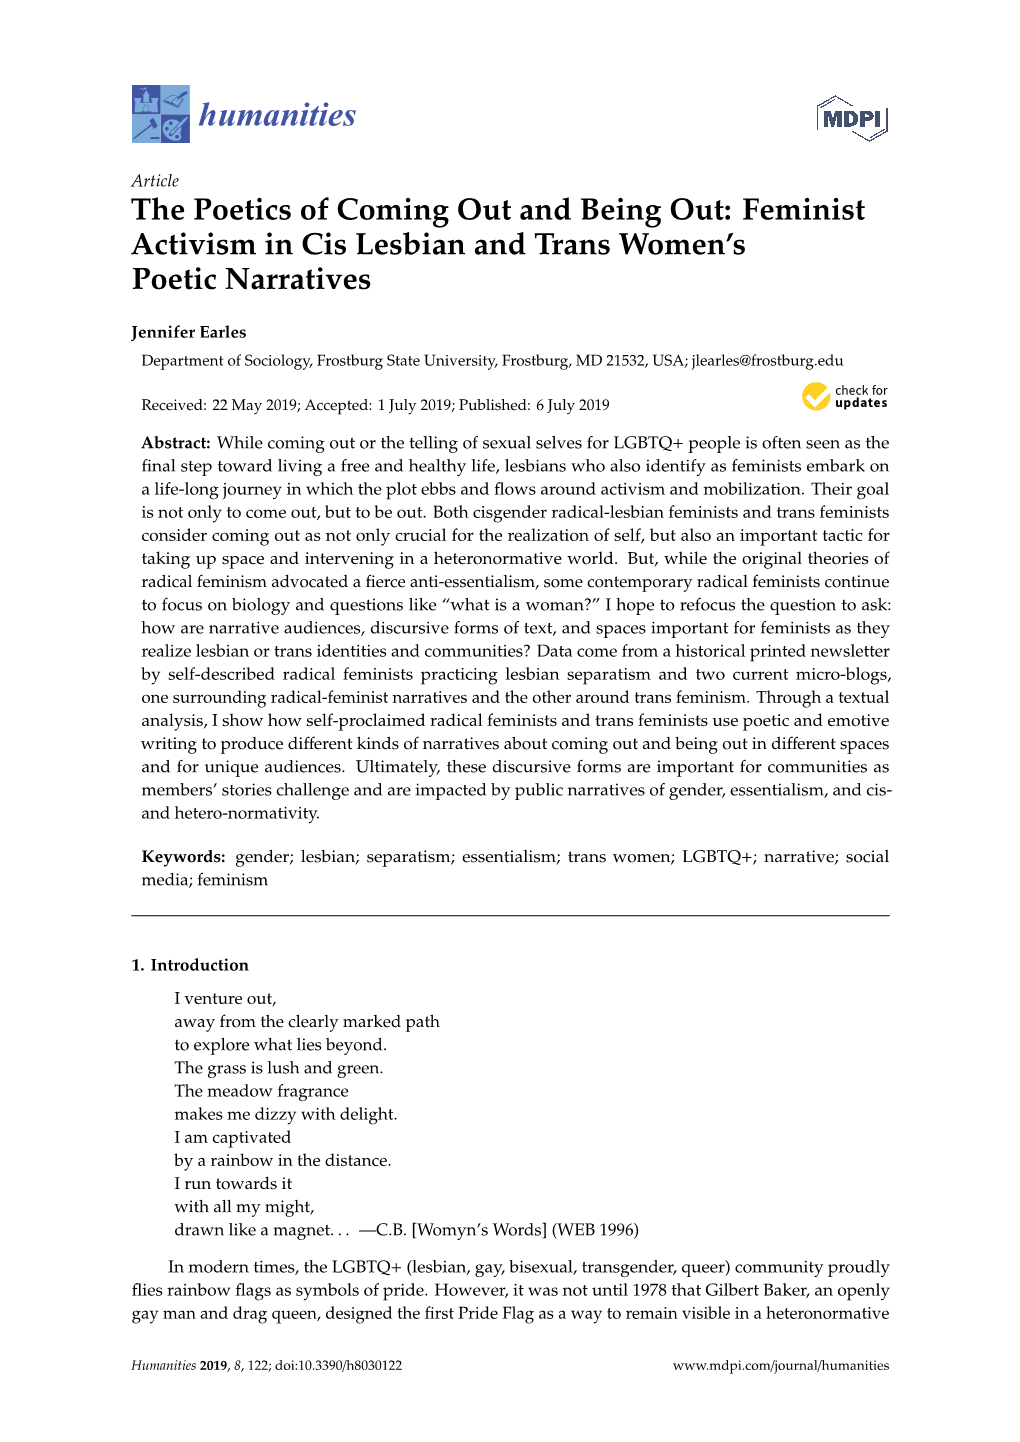 Feminist Activism in Cis Lesbian and Trans Women's